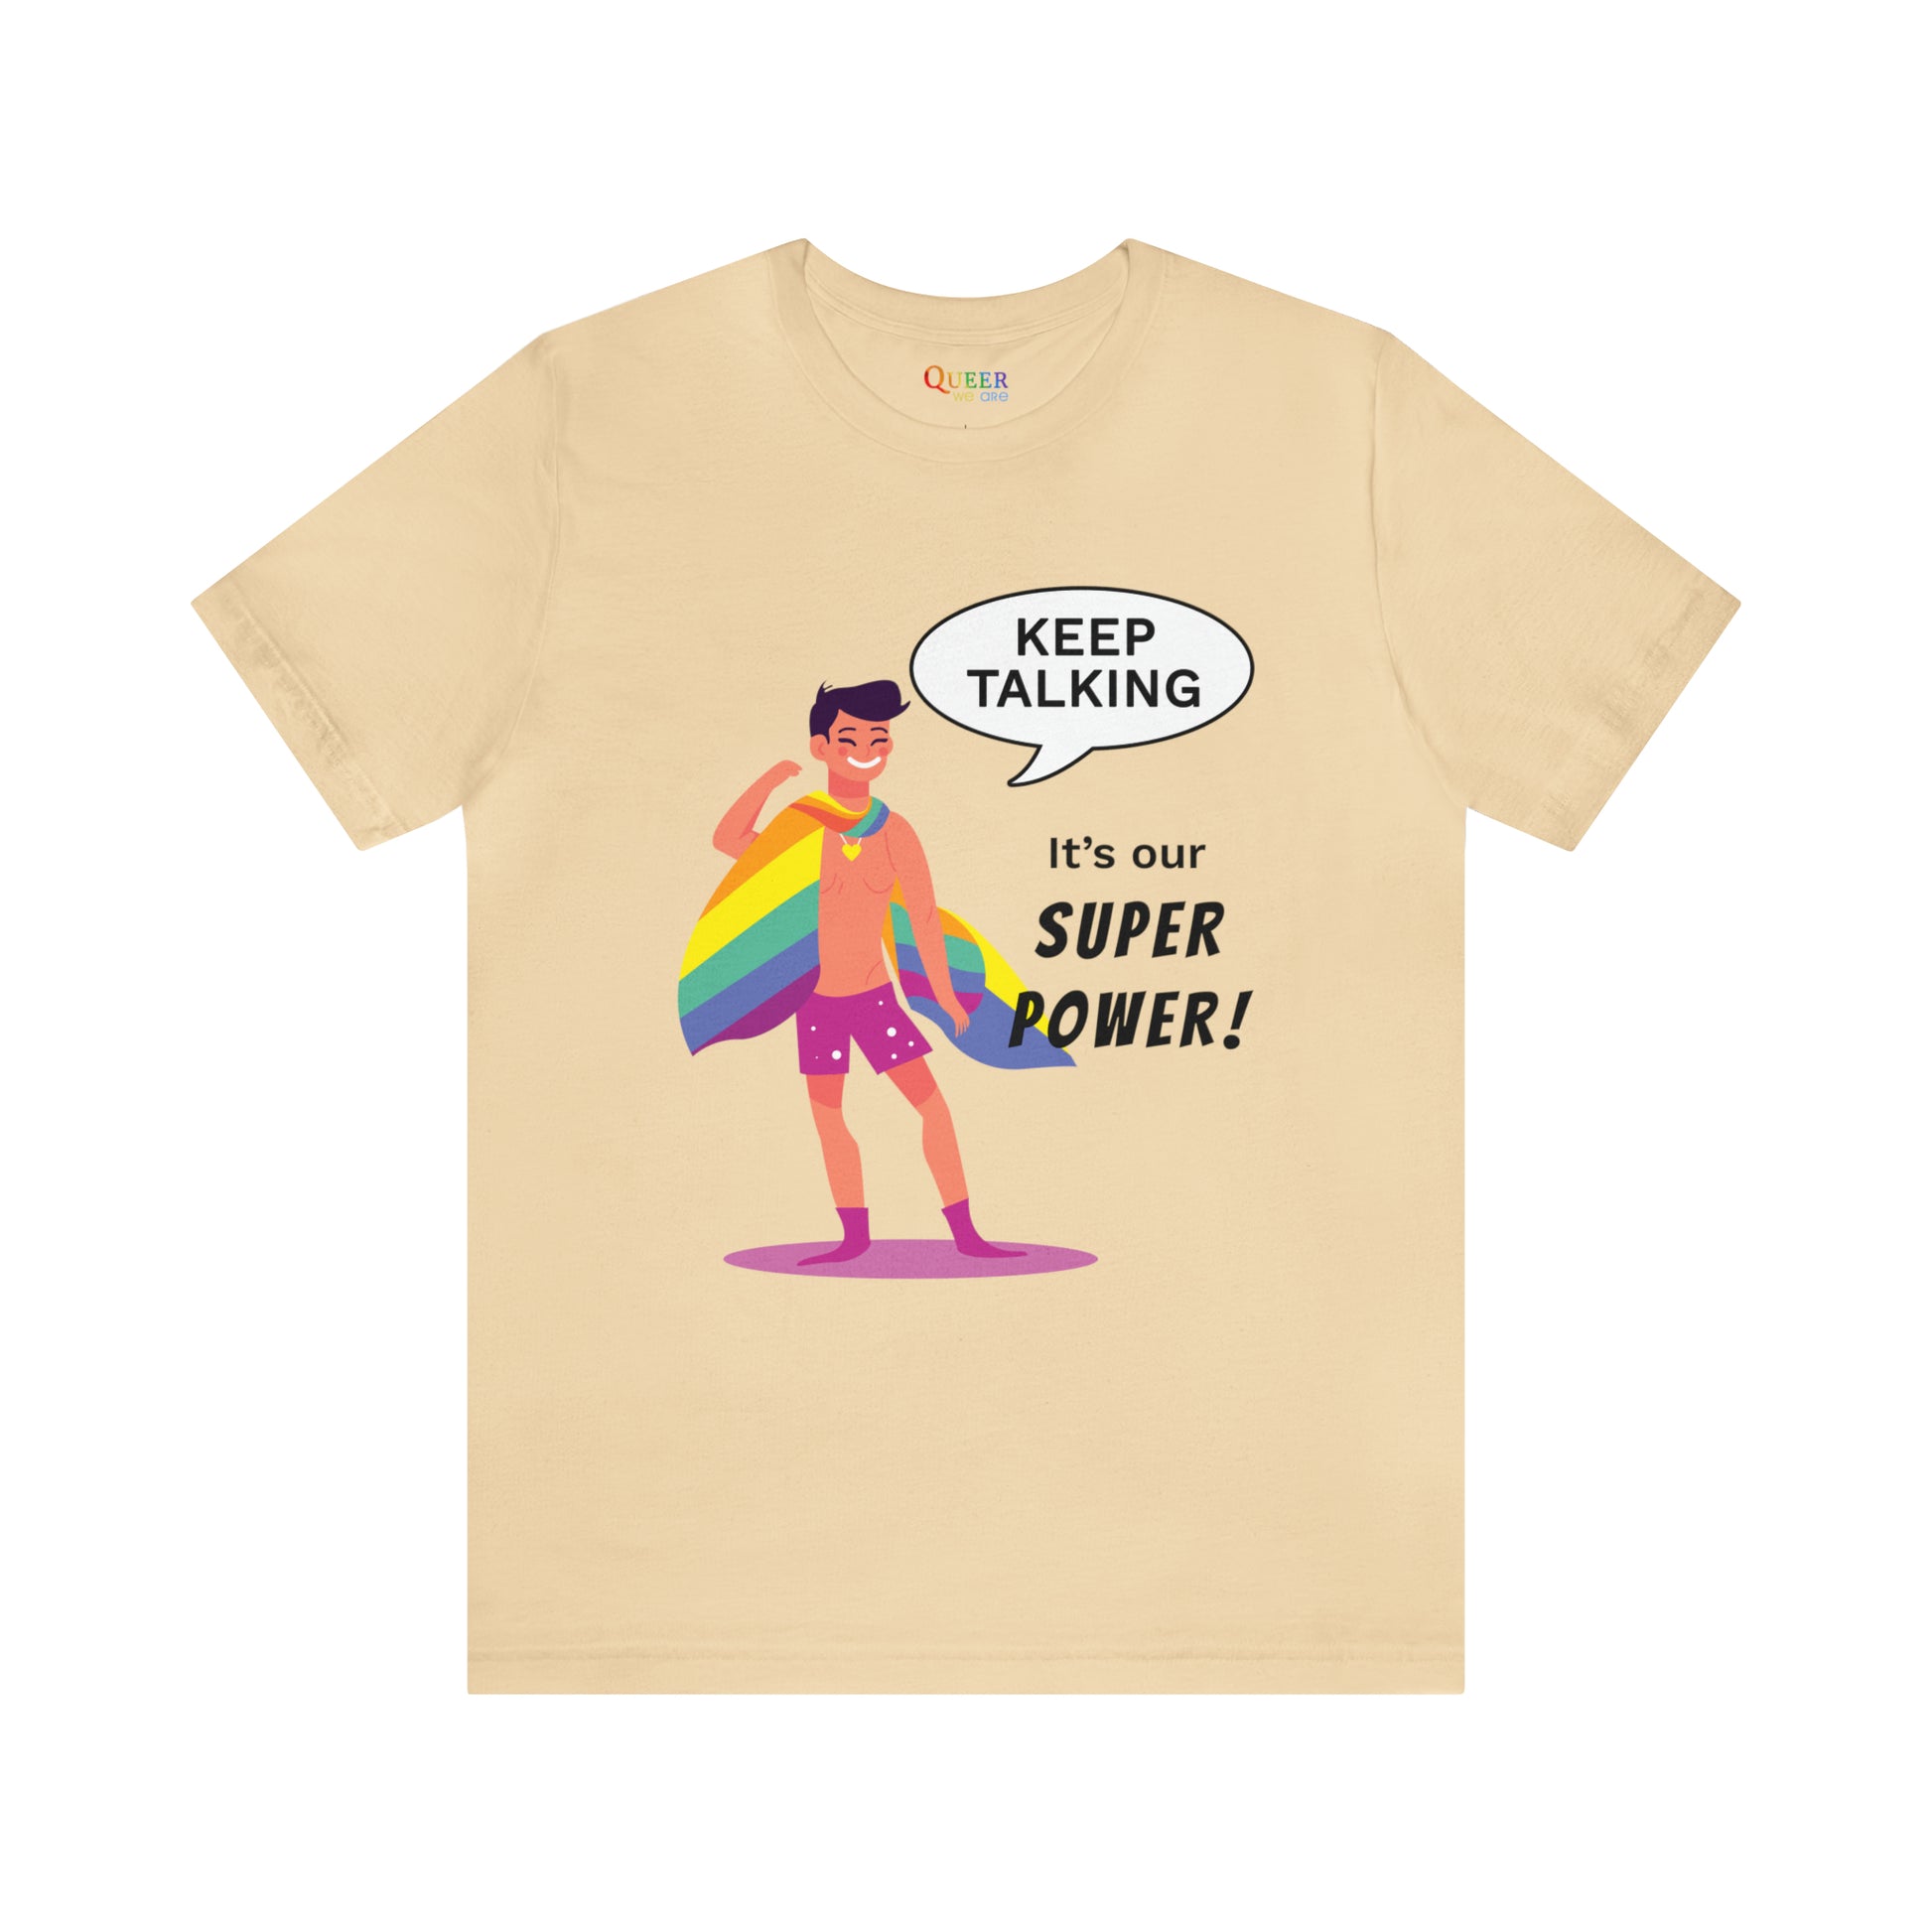 Keep Talking It's our Super Power! Unisex T-shirt - Queer We Are Shop